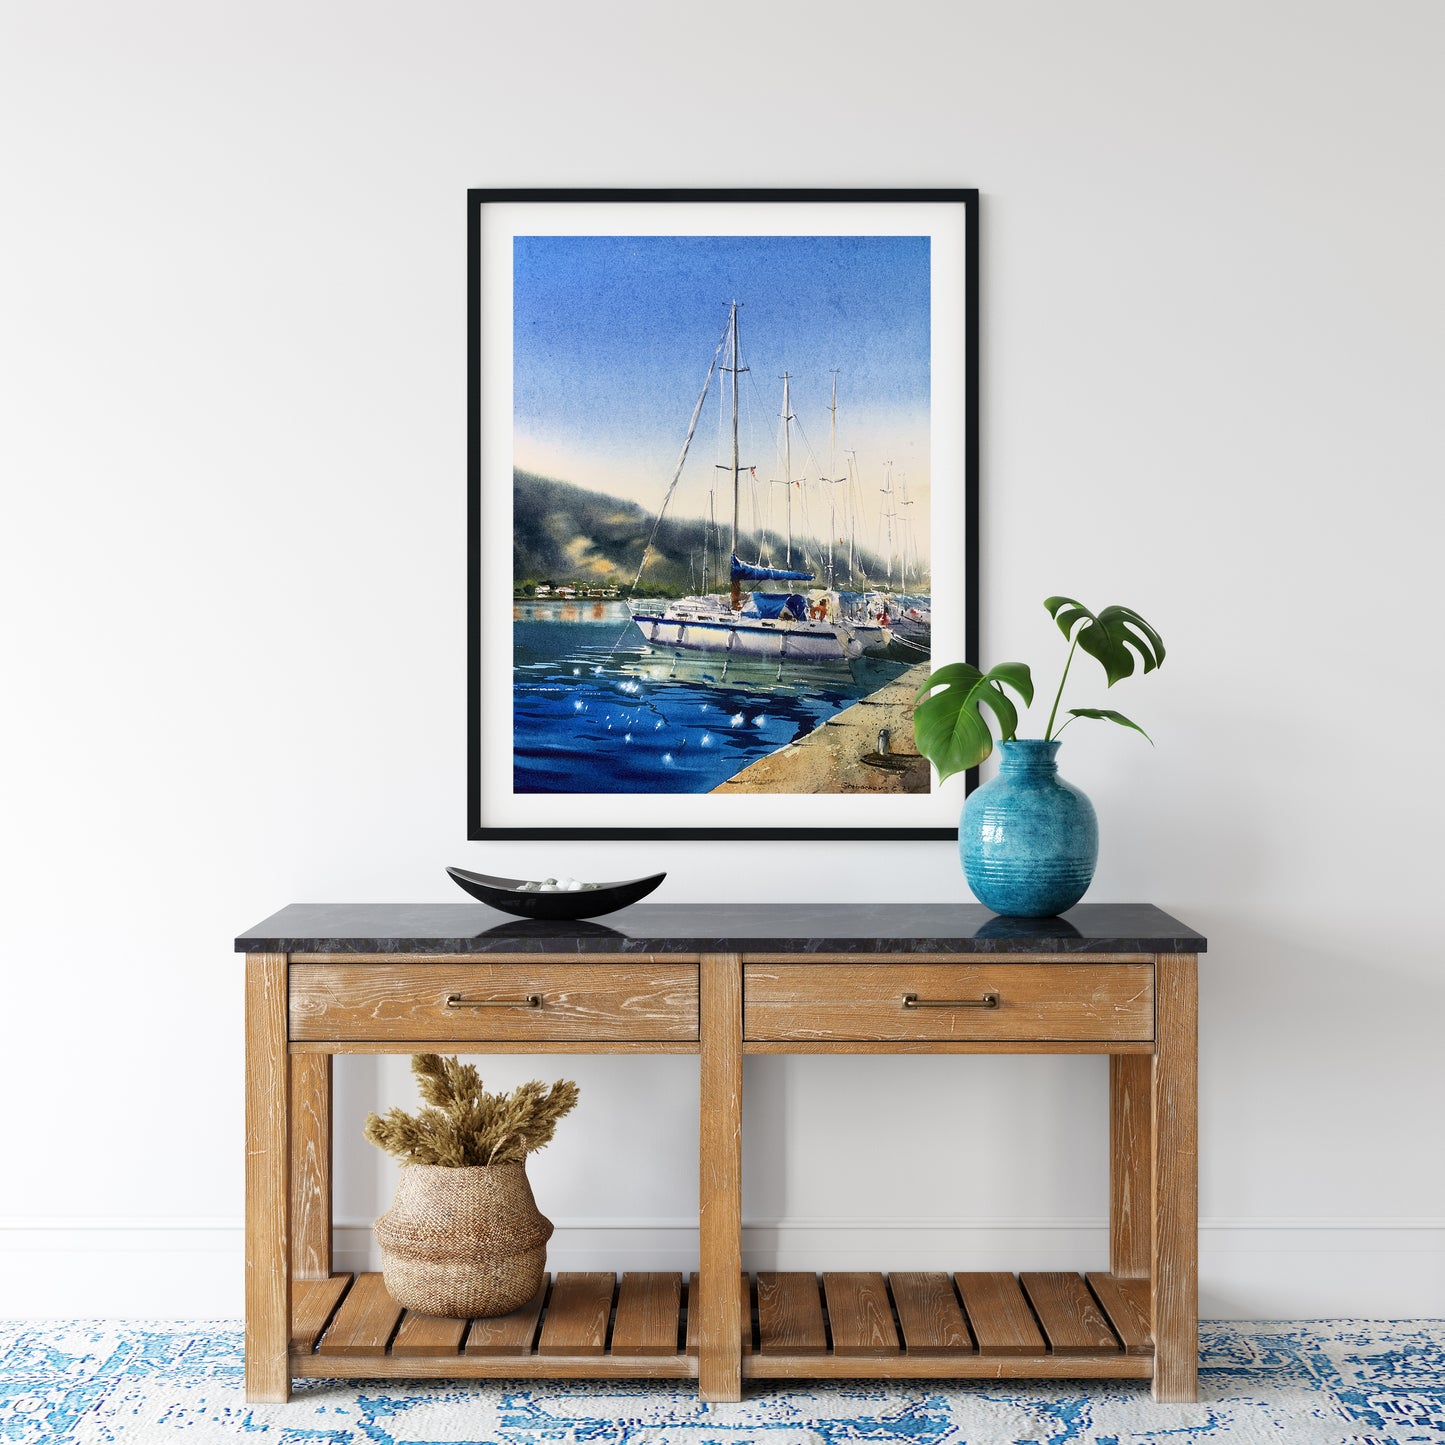 Yacht Art Print, Living Room Wall Decor, Watercolor Scenery Painting, Seascape Canvas Home/Office Decor Gift